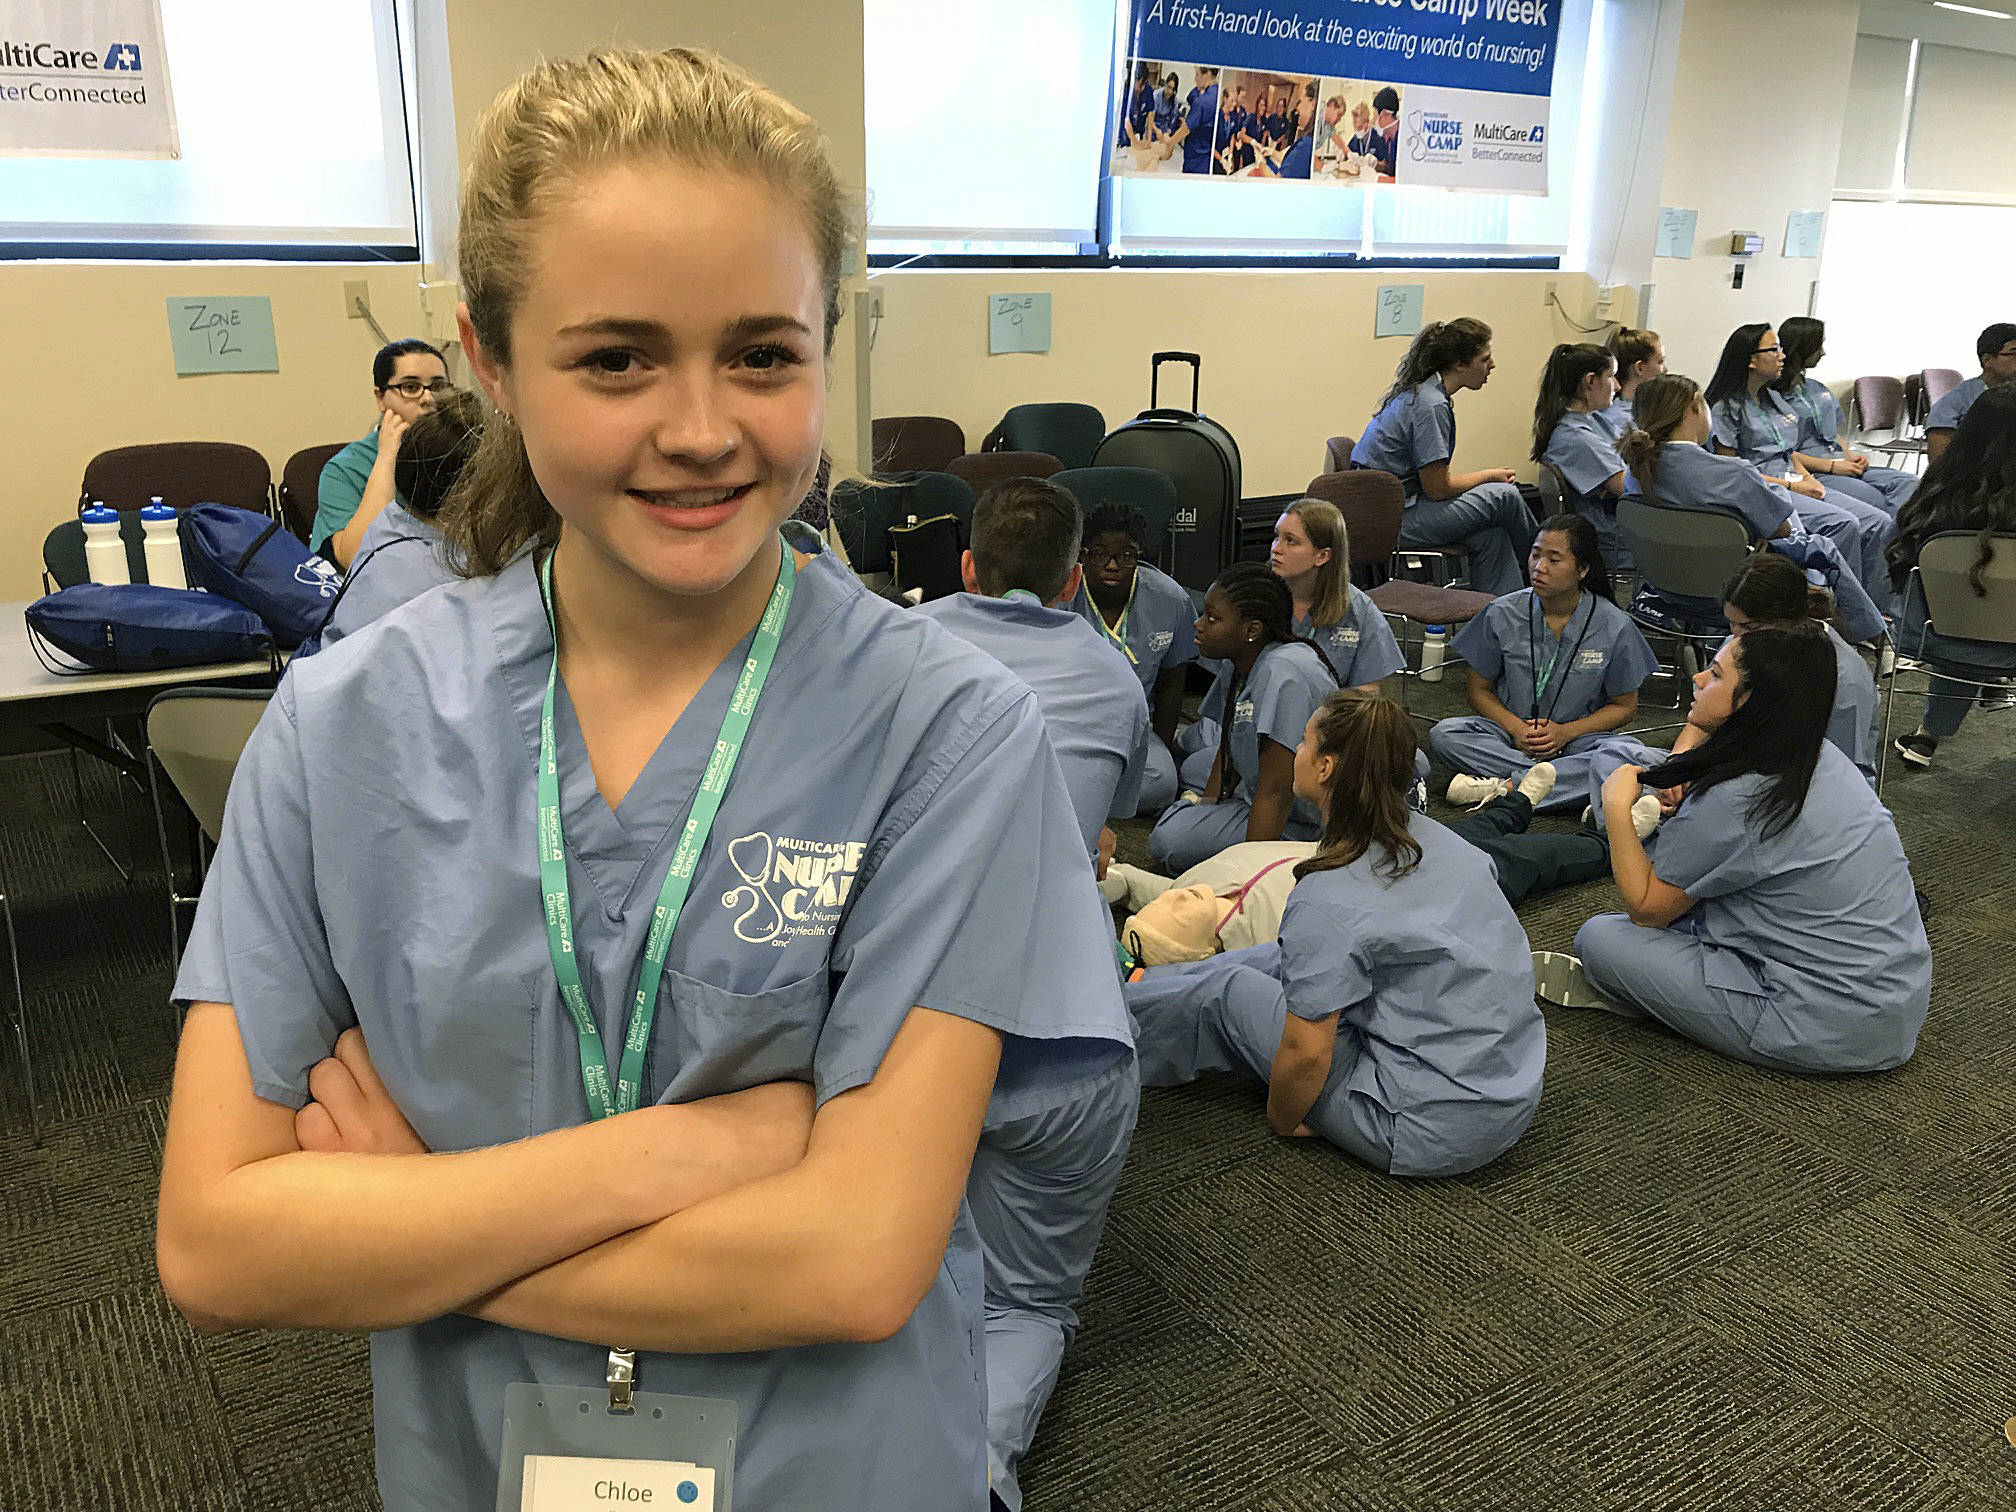 Chloe Knox, a junior-to-be at Auburn Riverside High School, enjoyed her hands-on experience at Nurse Camp last week. “It was better than expected,” she said. MARK KLAAS, Reporter